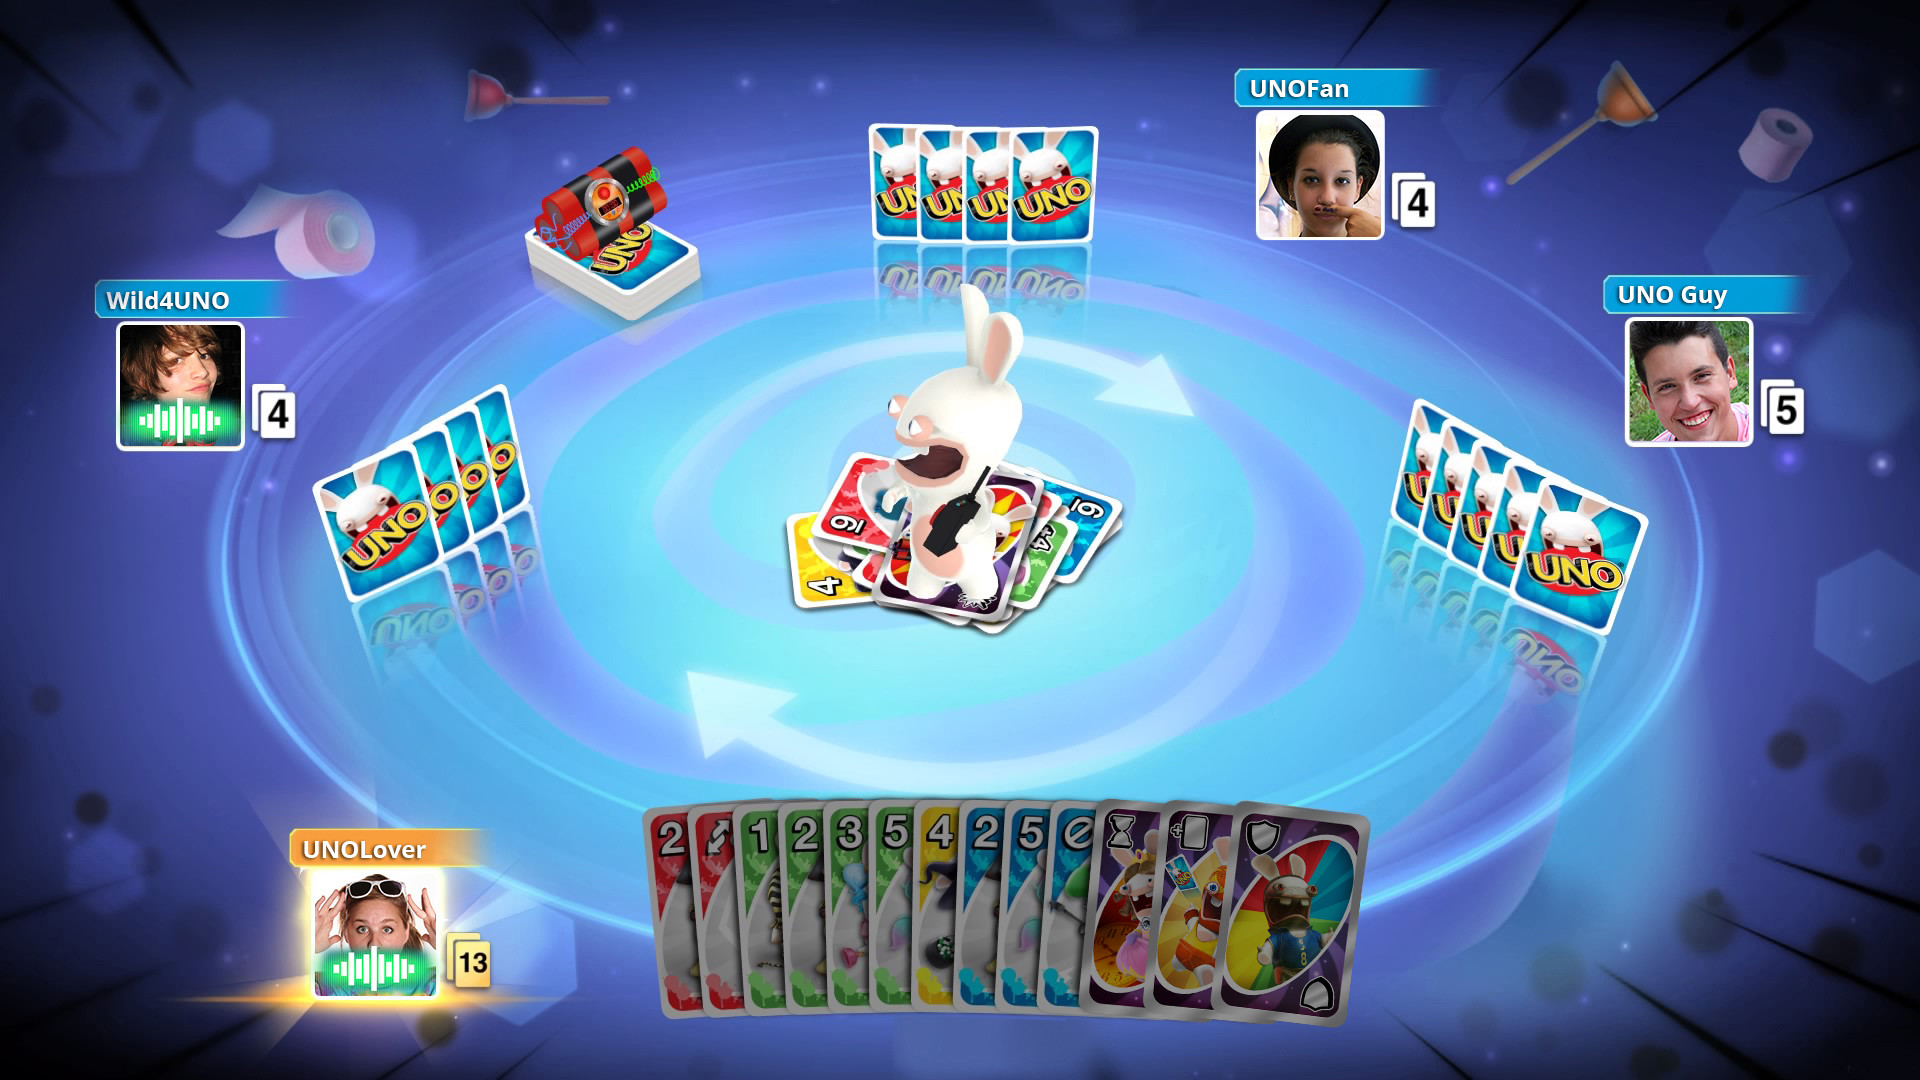 Download Uno Game For Pc